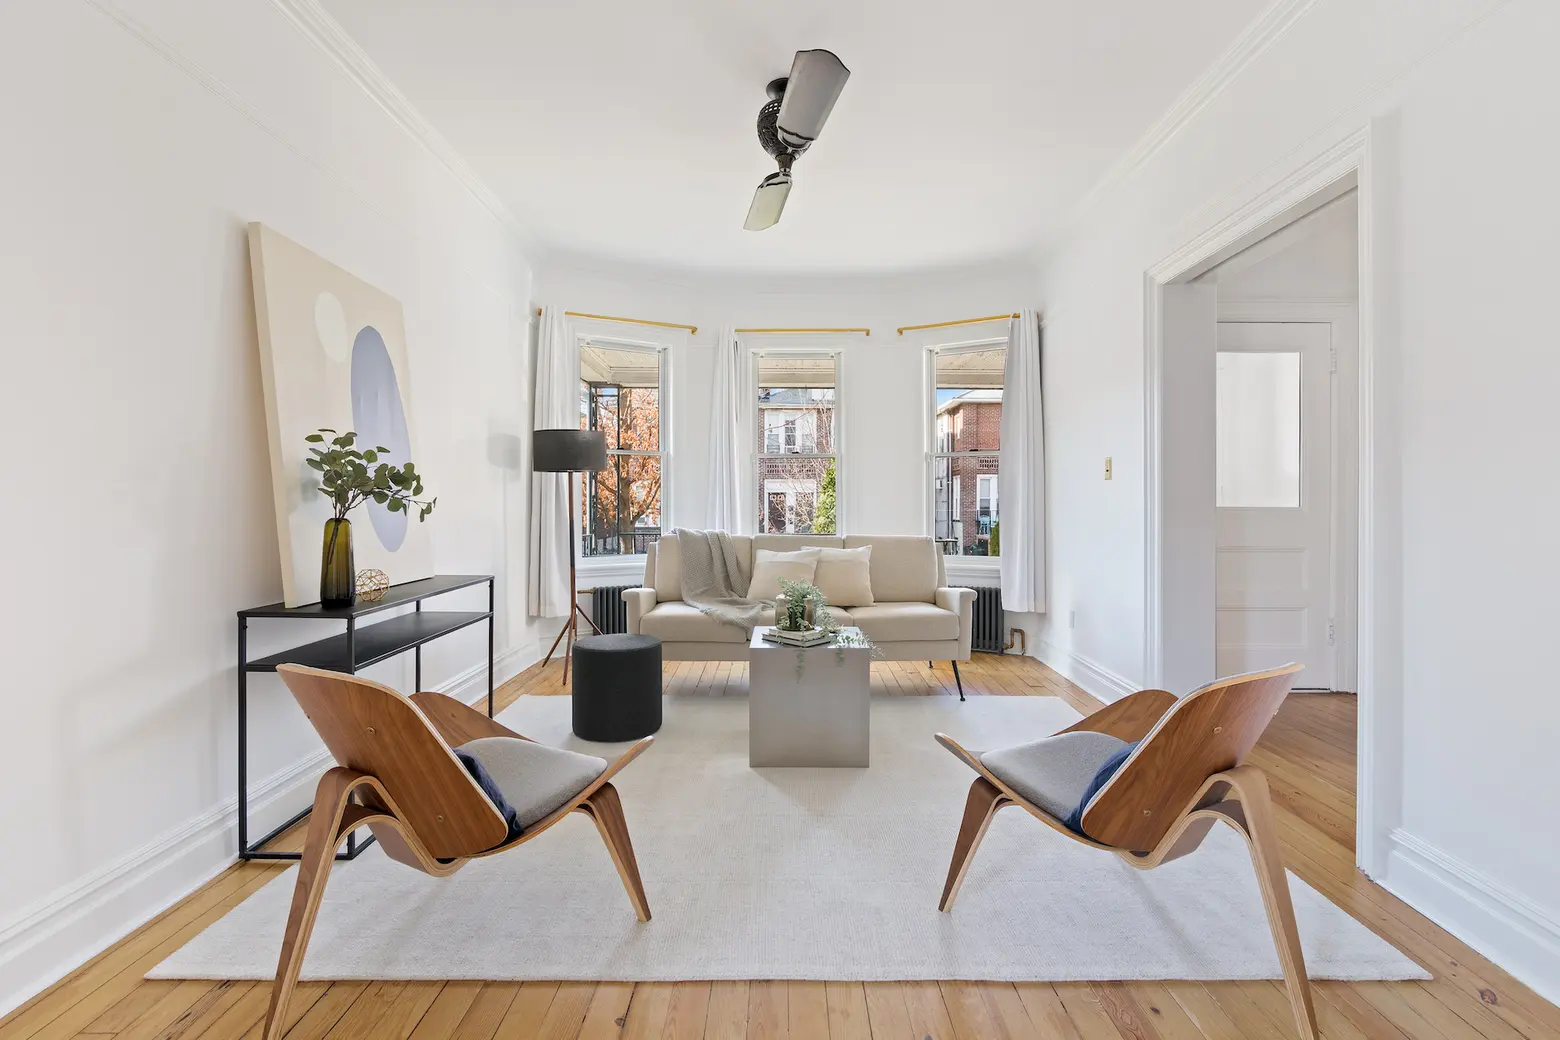 Everyone can have their own room in this charming $2M Brooklyn house with parking and a yard